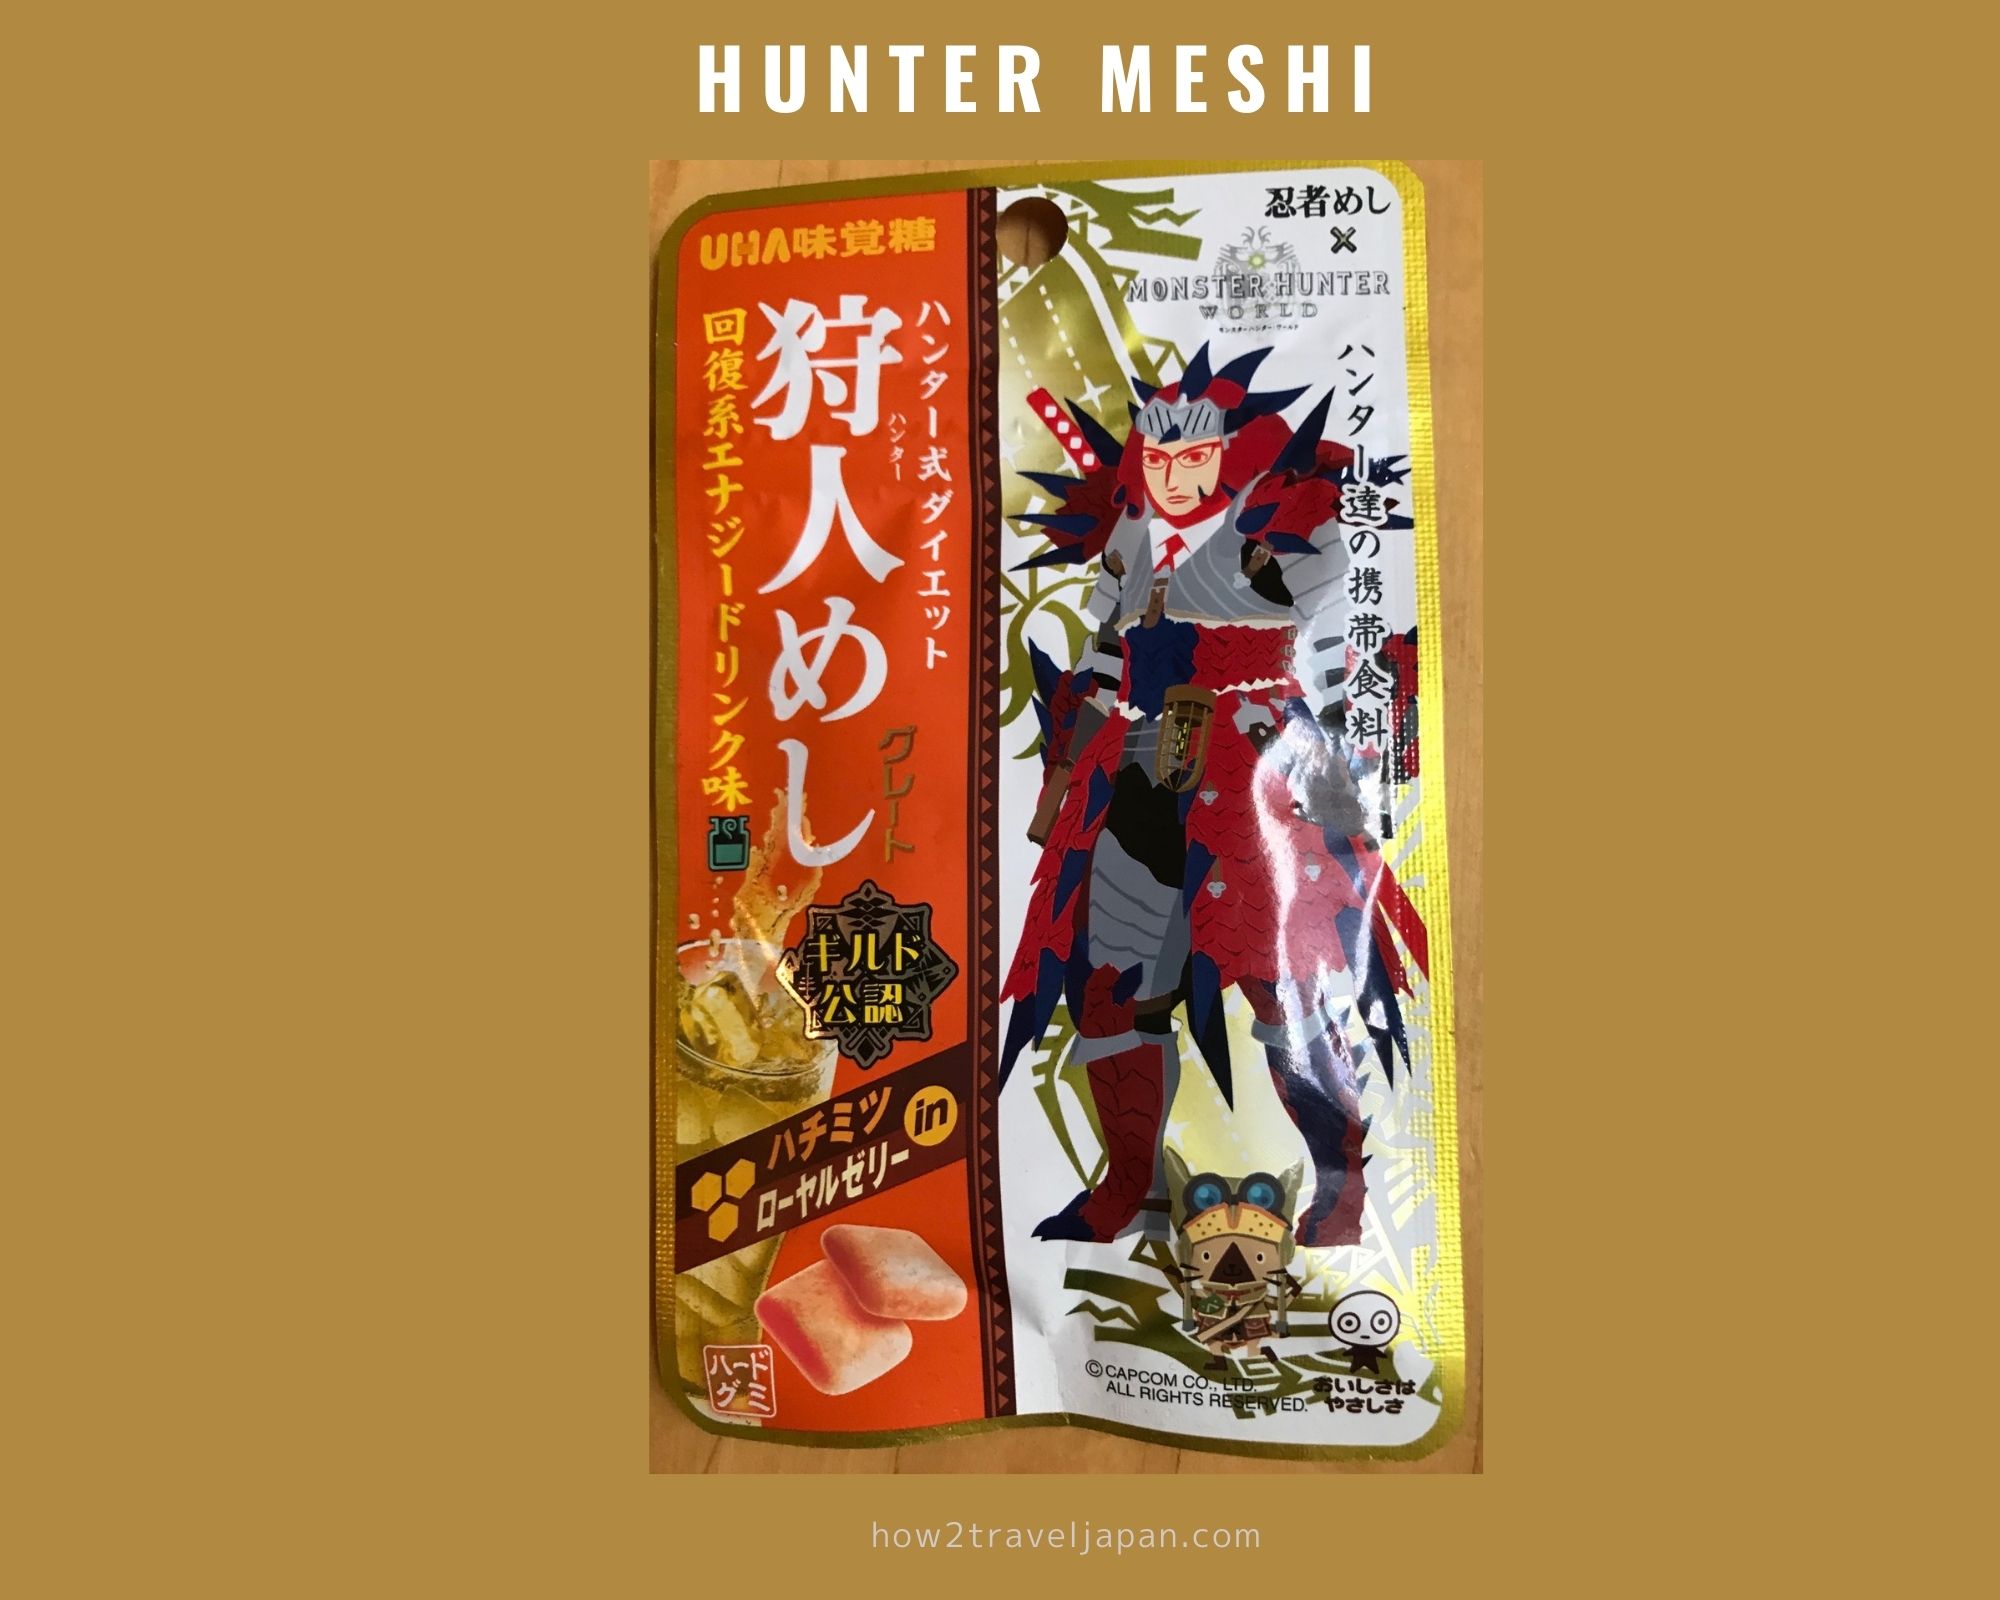 You are currently viewing Hunter meshi from UHA Mikakuto, a hard gummy for Hunters